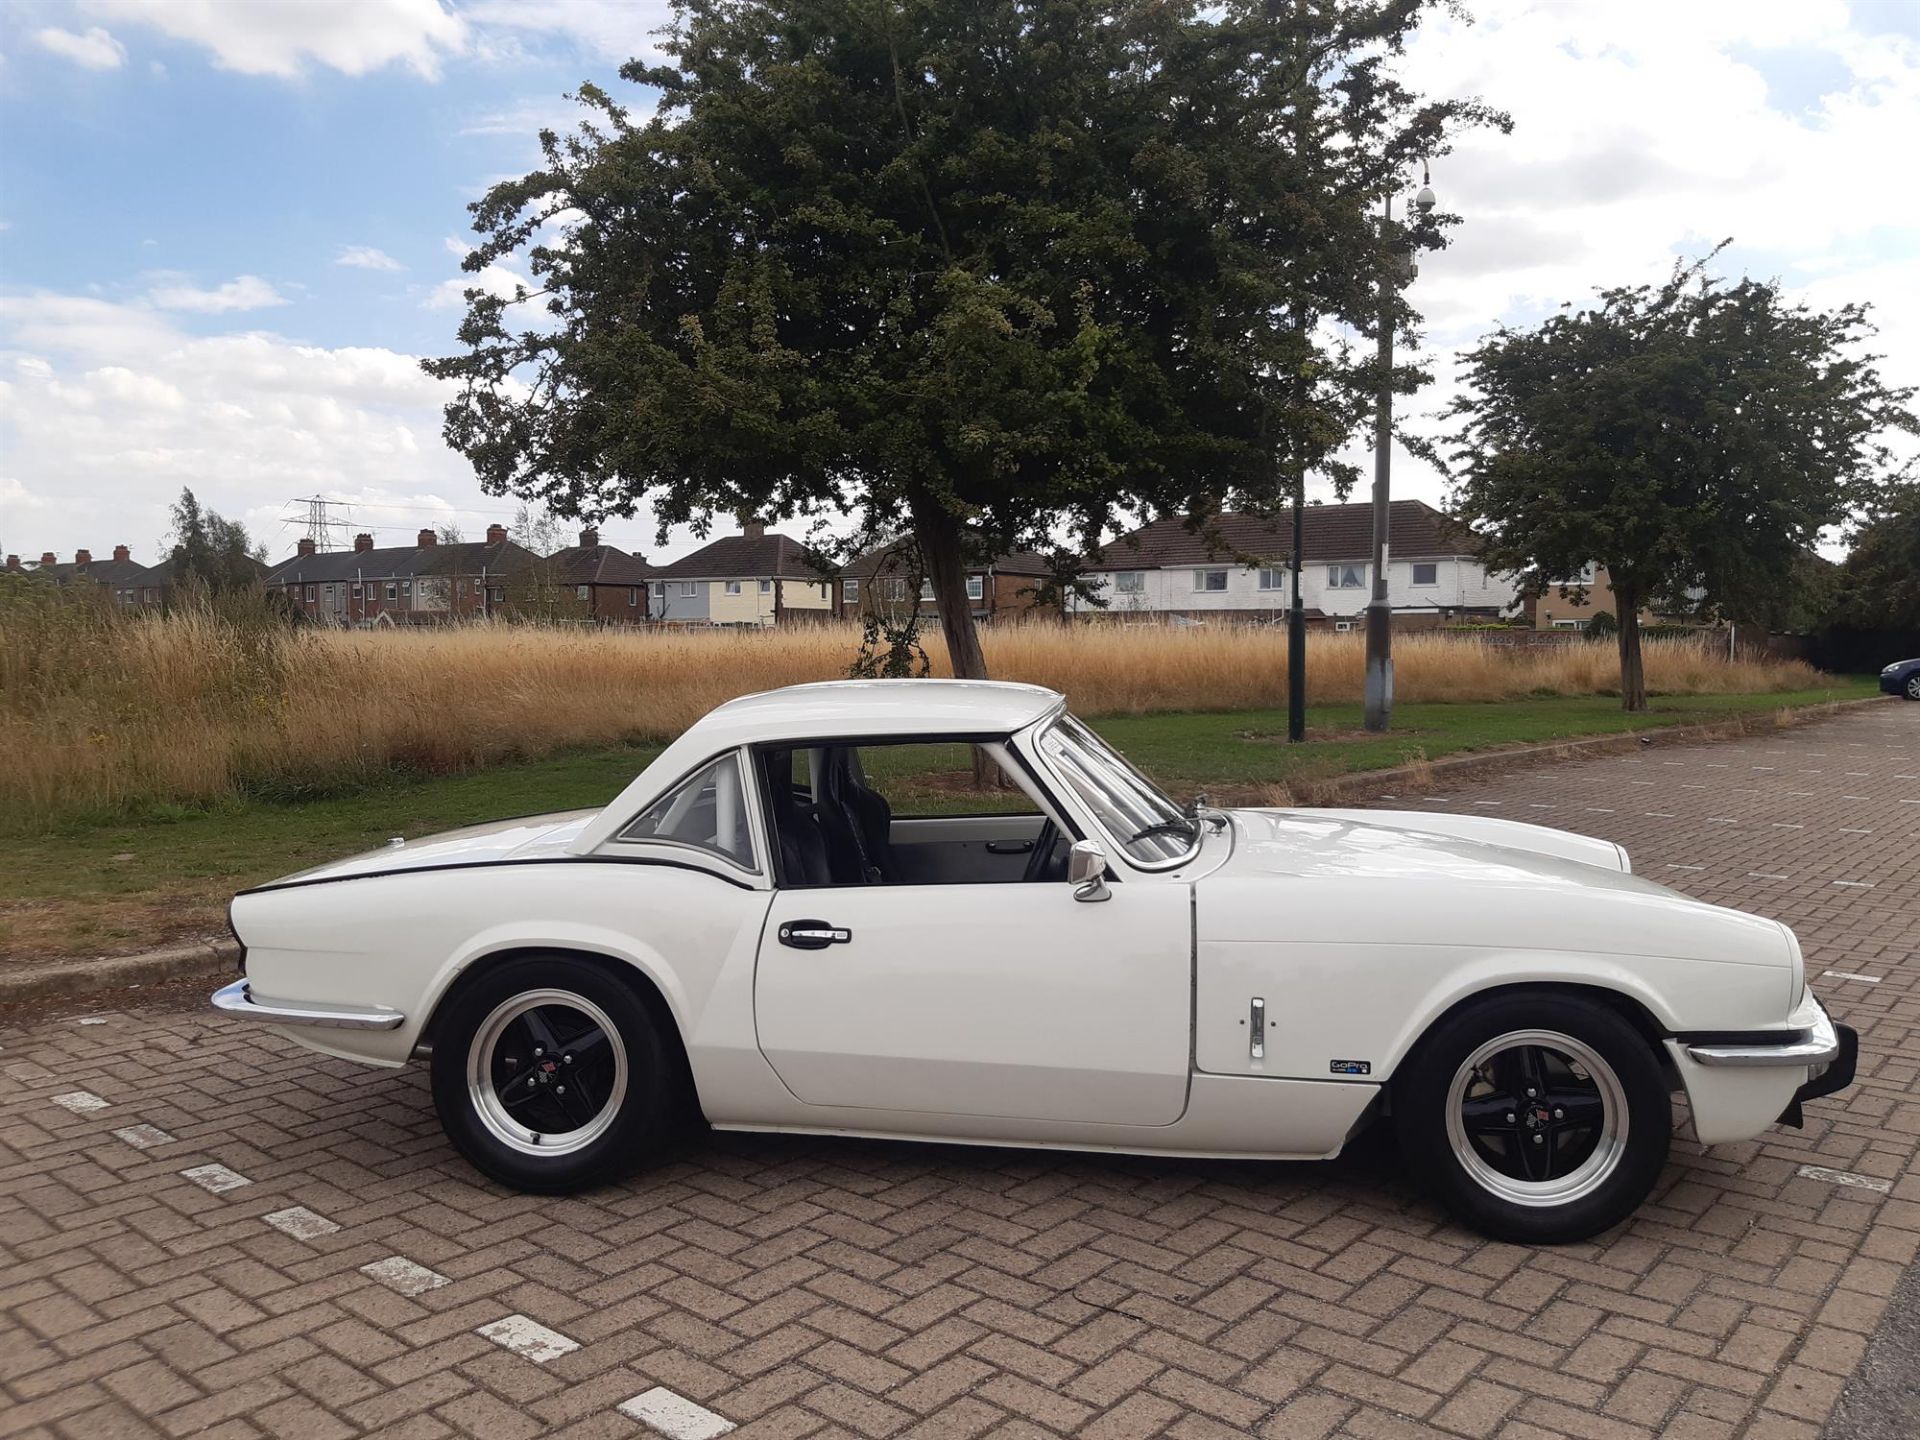 1980 Triumph Spitfire 1500 Fast Road Comvertible with Hardtop - Image 5 of 10